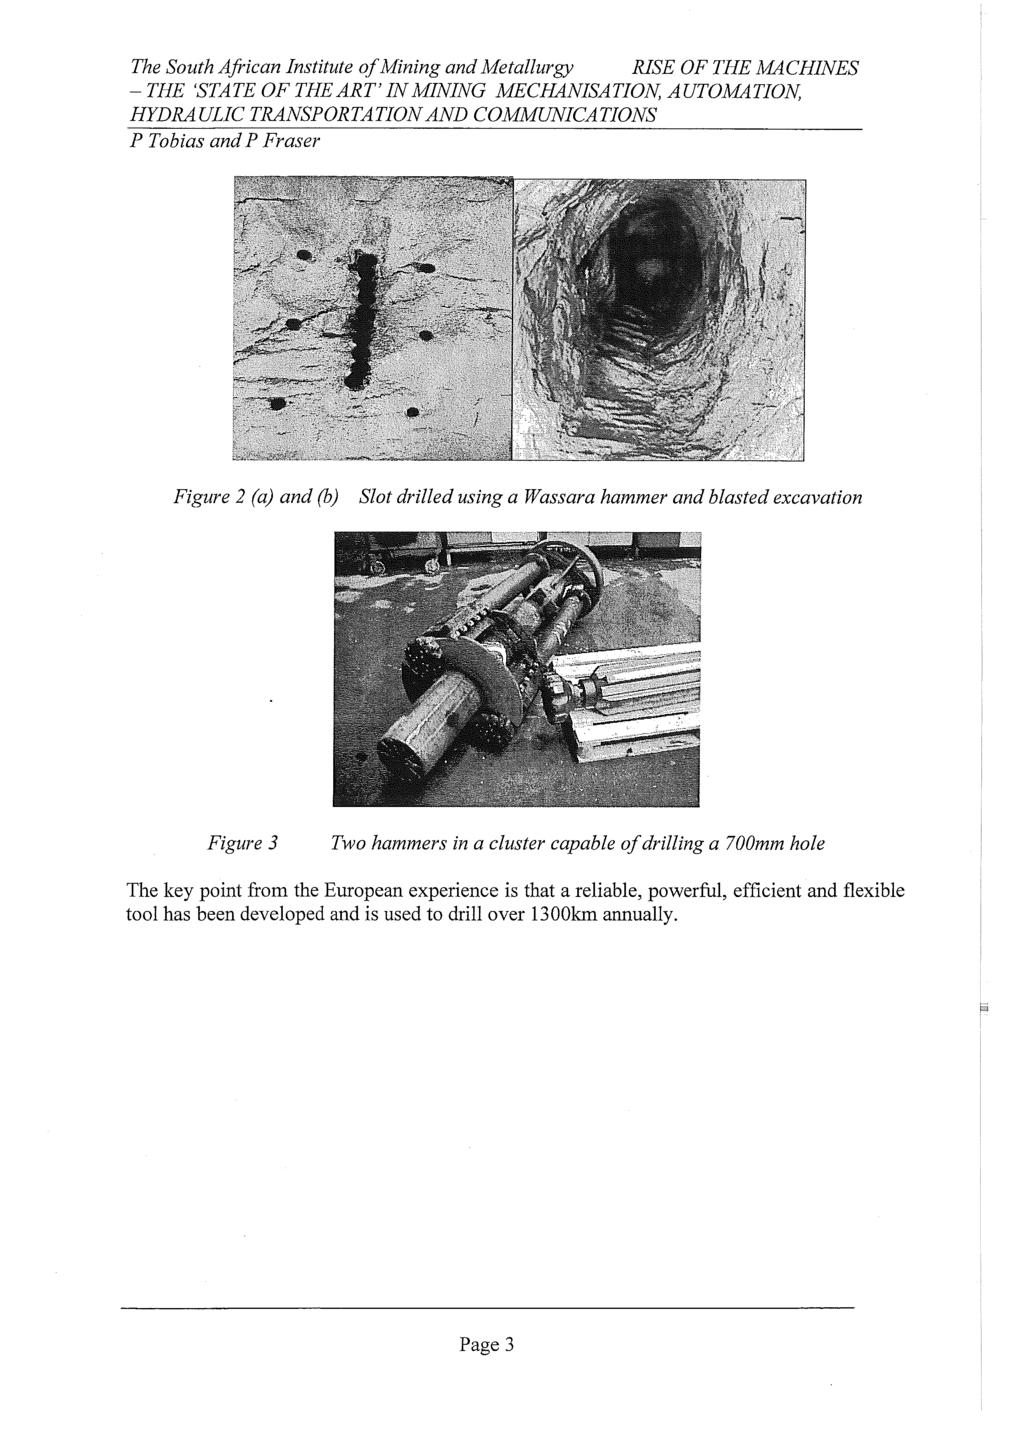 Figure 2 (a) and (b) Slot drilled using a Wassara hammer and blasted excavation Figure 3 Two hammers in a cluster capable of drilling a 700mm hole The key